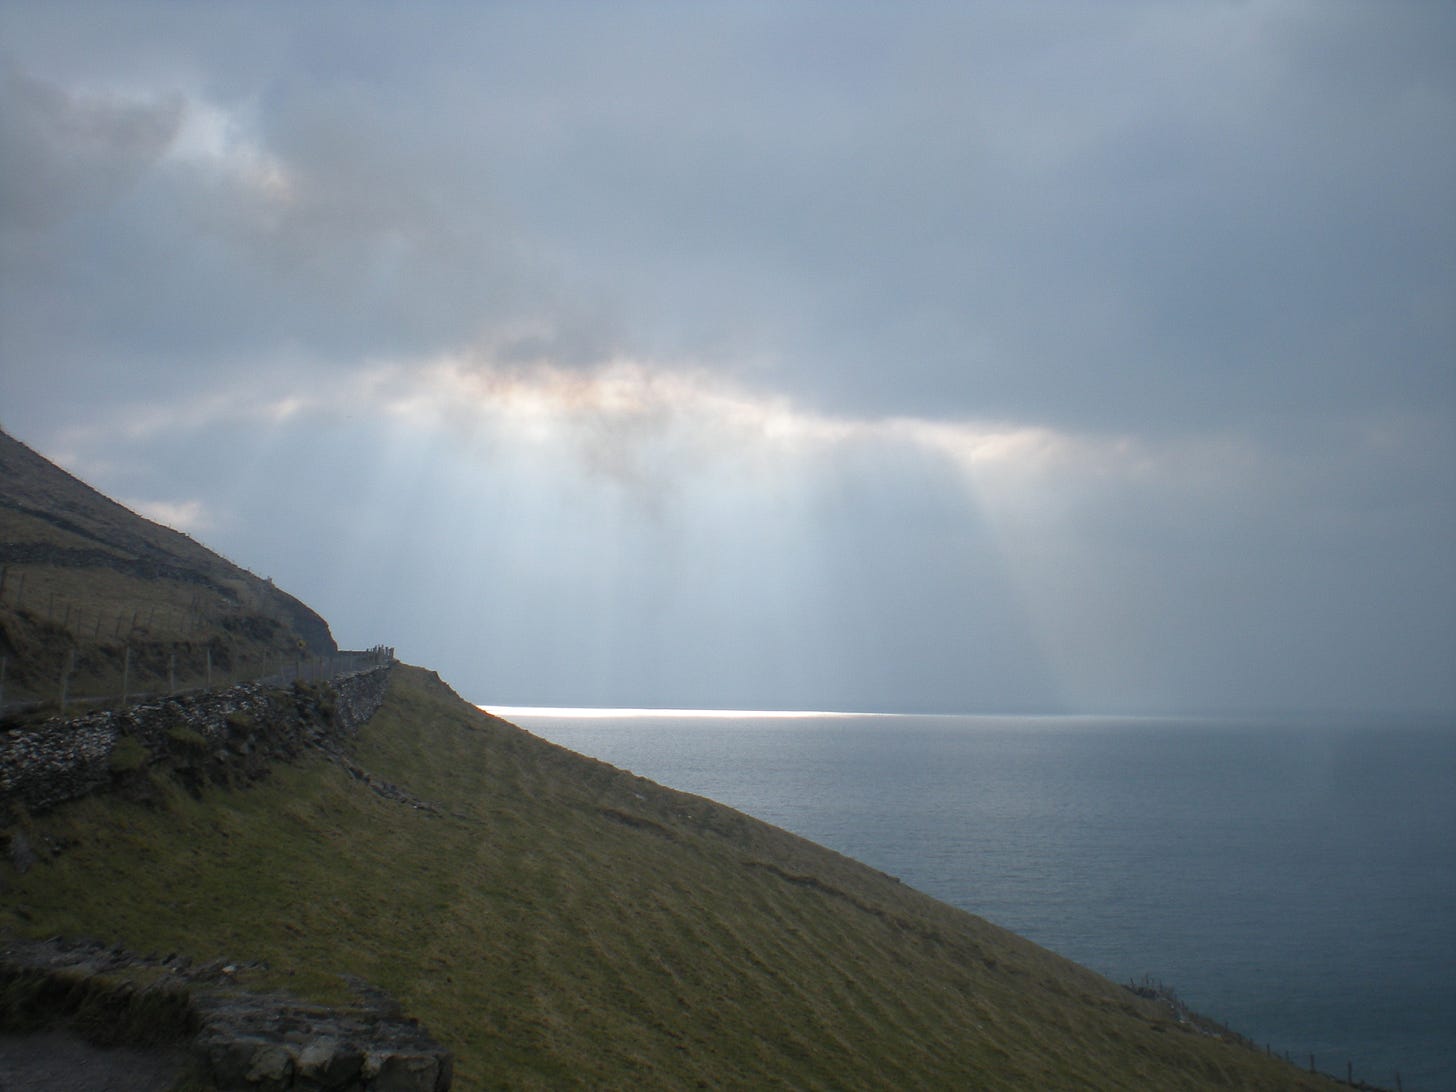 A narrow road runs around the edge of a green hill, with rays of light shining down on a distant portion of the sea. 